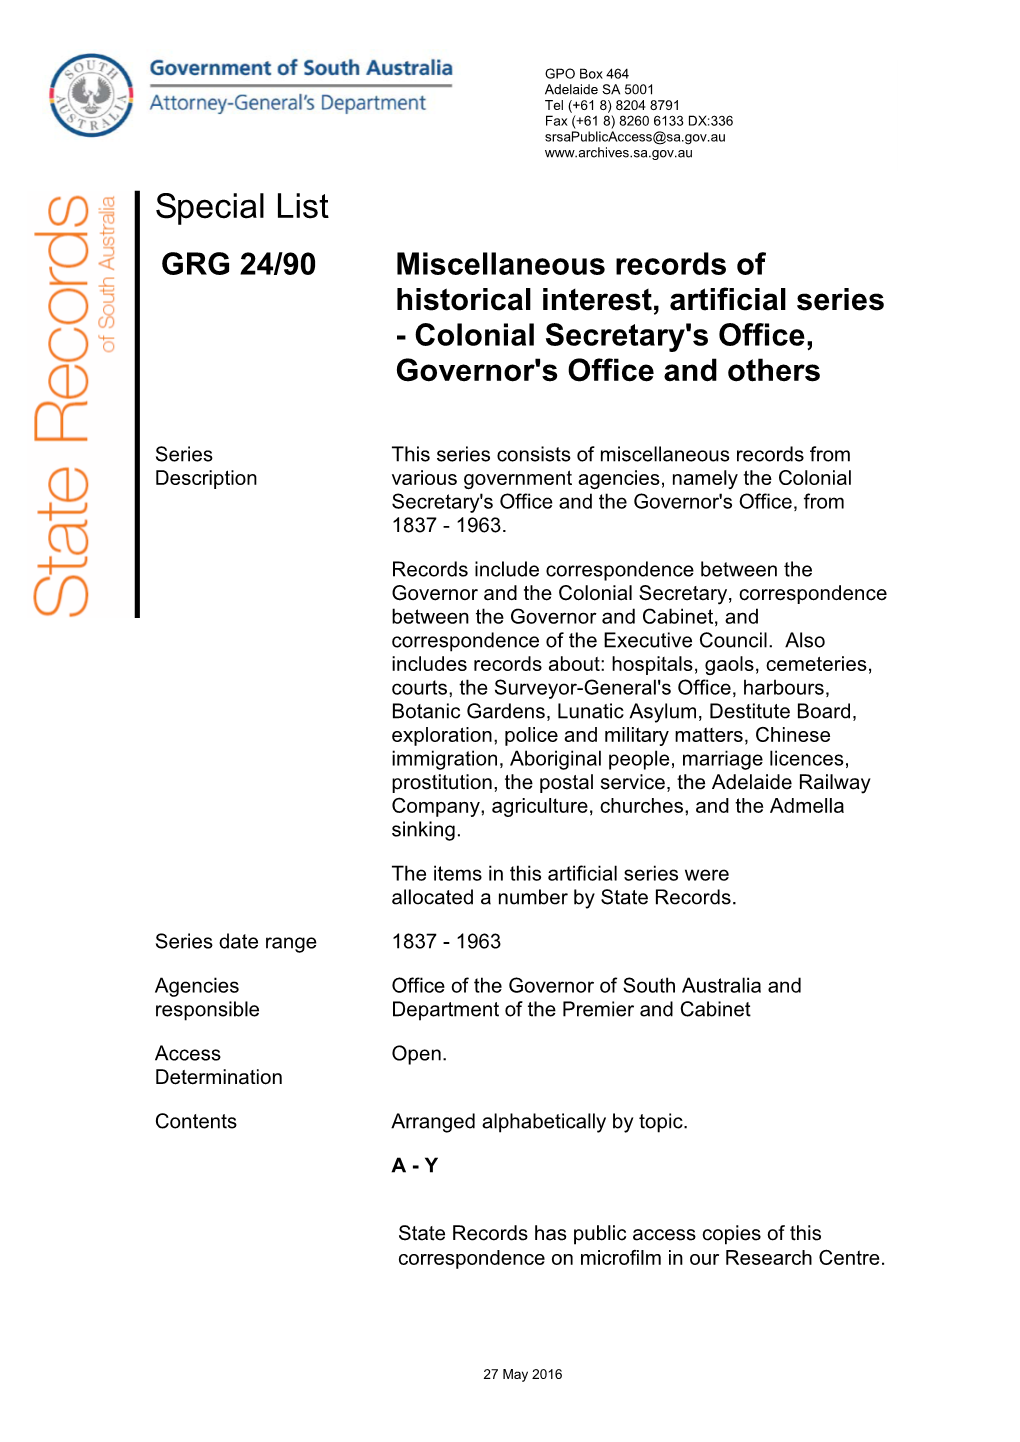 For GRG 24/90 Miscellaneous Records of Historical Interest